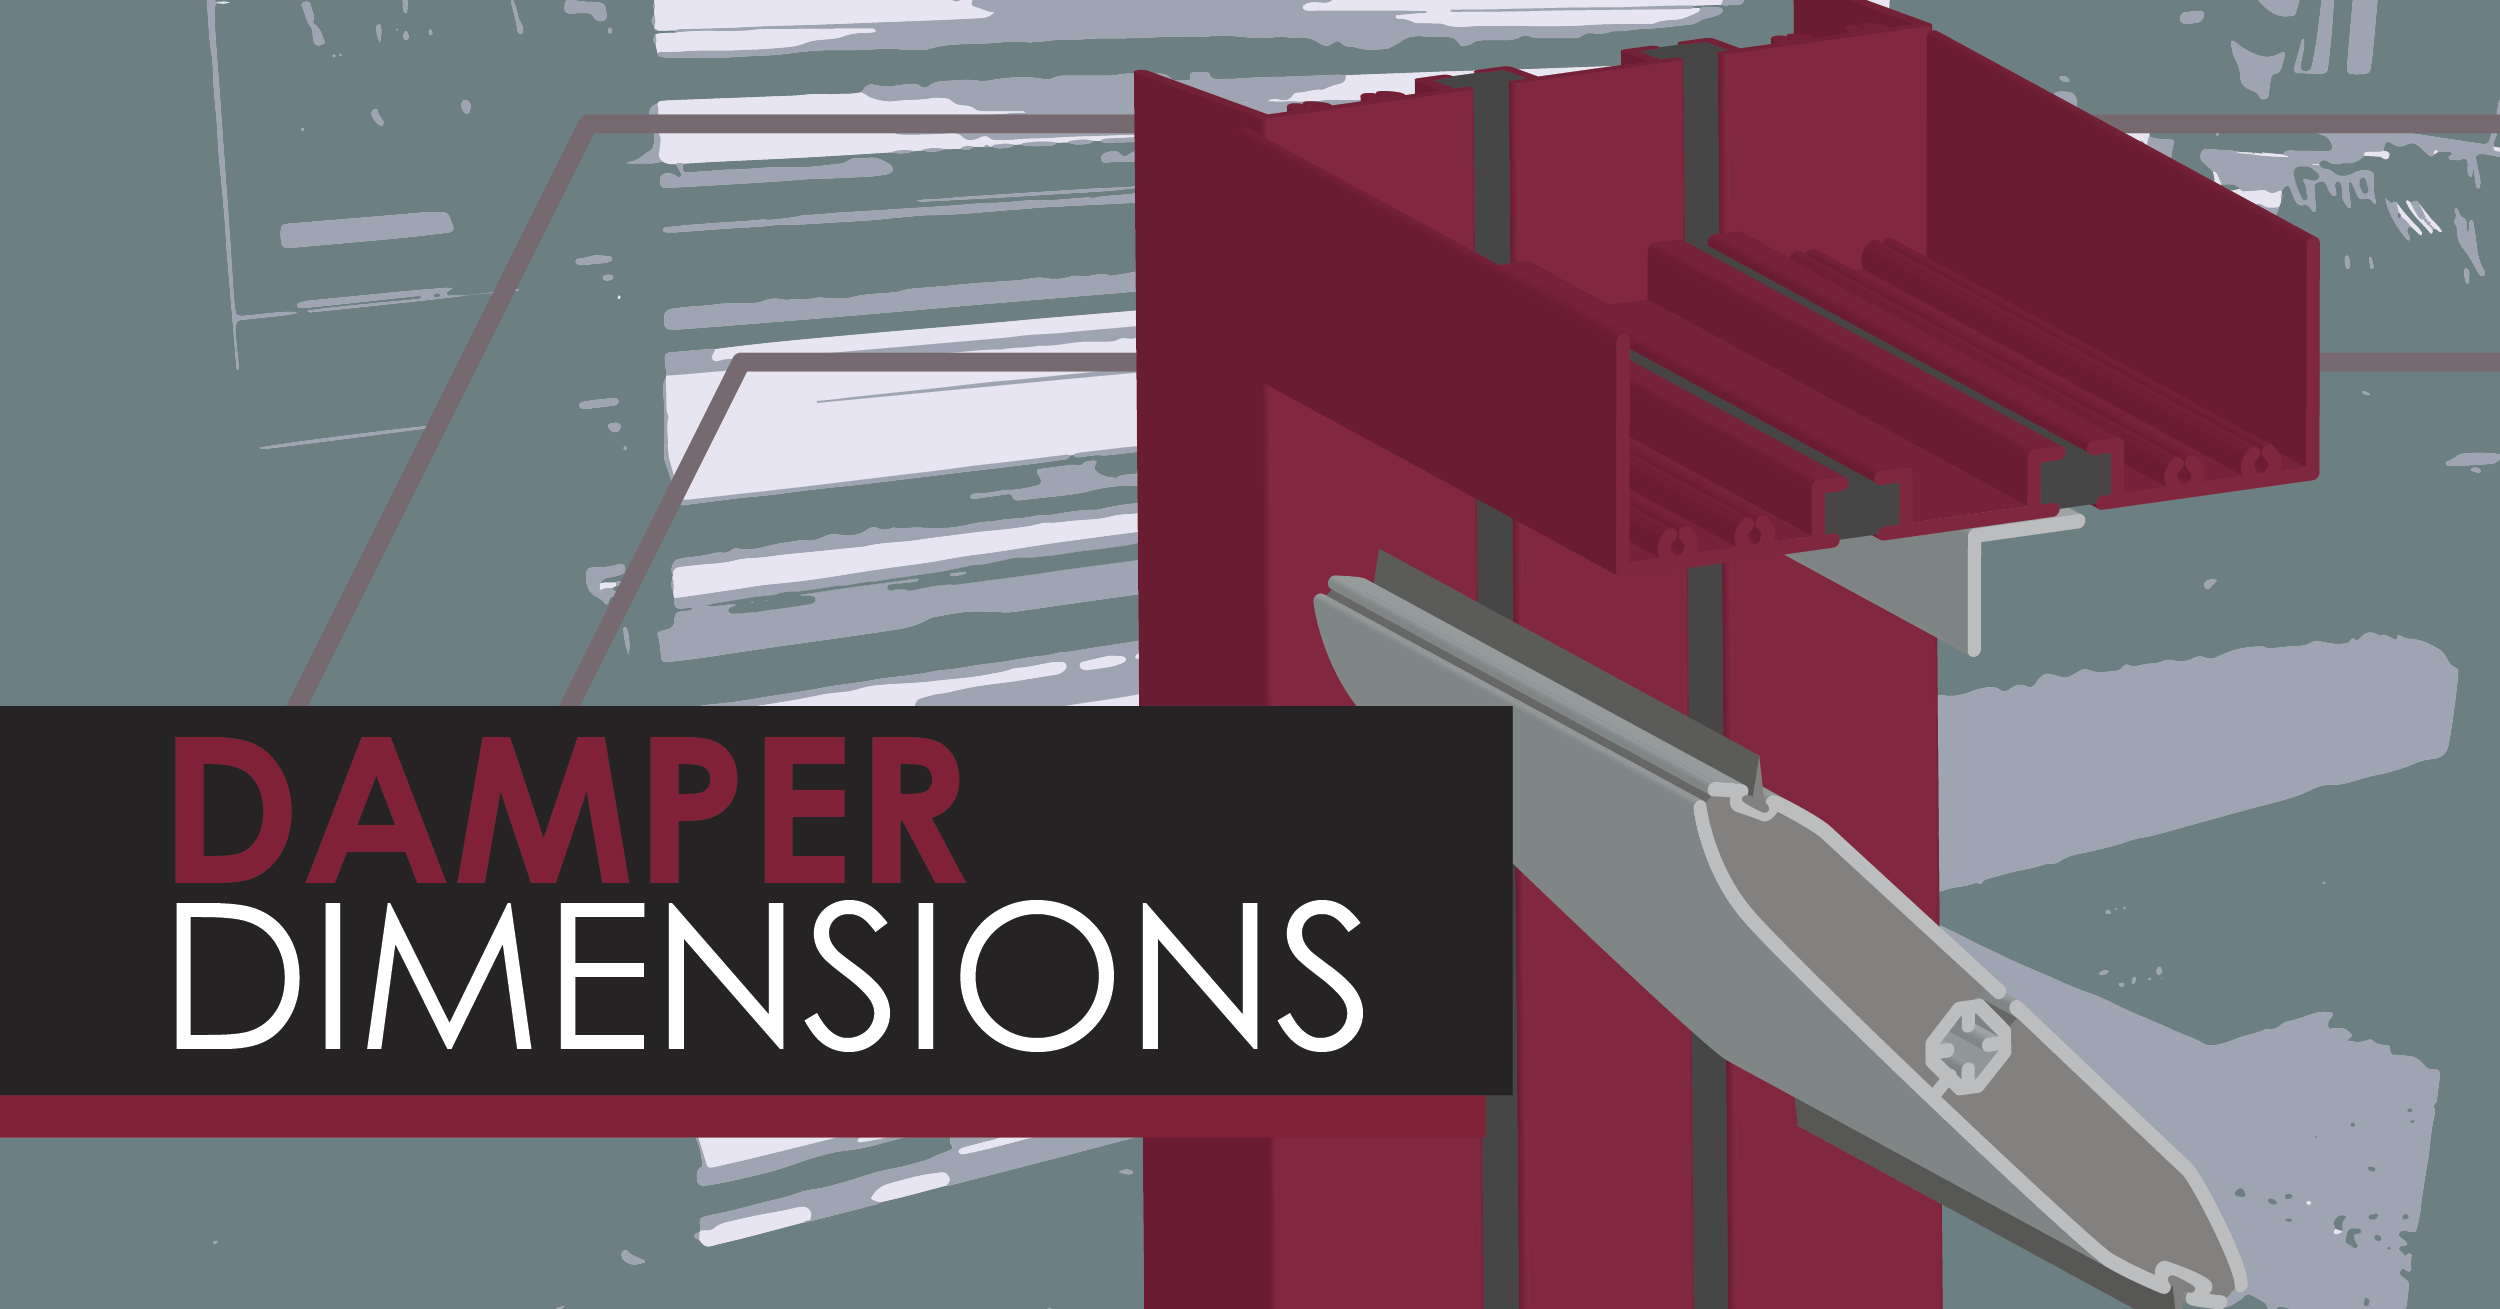 Damper Dimensions - Sizing control dampers for the best fit